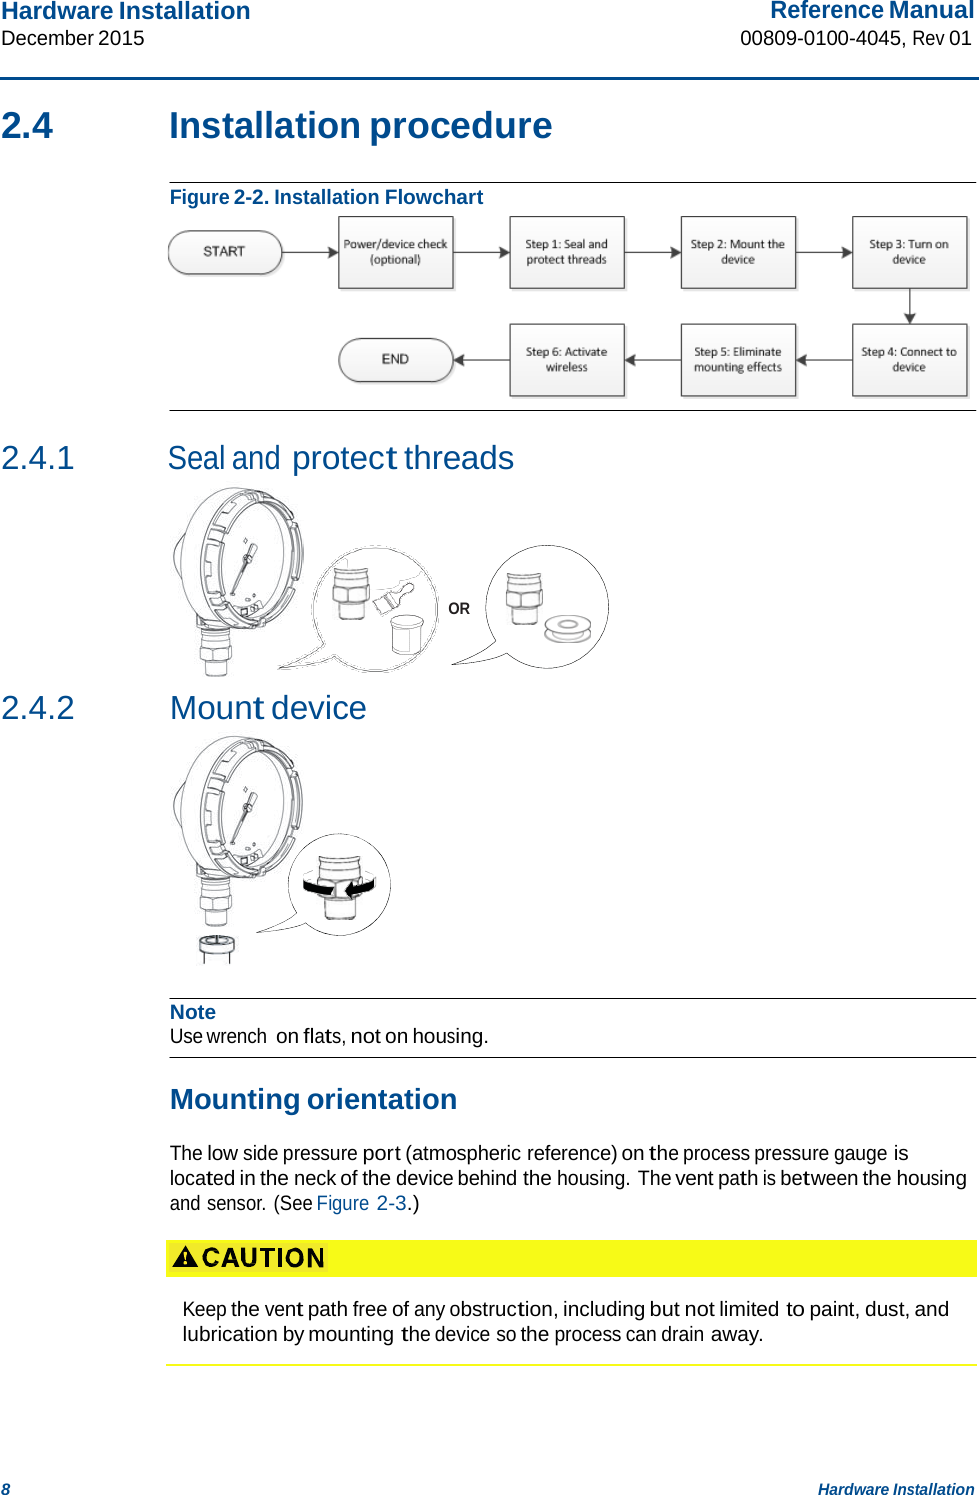 Hardware Installation December 2015 Reference Manual 00809-0100-4045, Rev 01 8 Hardware Installation    2.4  Installation procedure   Figure 2-2. Installation Flowchart    2.4.1 Seal and protect threads       OR    2.4.2 Mount device             Note Use wrench on flats, not on housing.   Mounting orientation  The low side pressure port (atmospheric reference) on the process pressure gauge is located in the neck of the device behind the housing. The vent path is between the housing and sensor. (See Figure 2-3.)     Keep the vent path free of any obstruction, including but not limited to paint, dust, and lubrication by mounting the device so the process can drain away. 